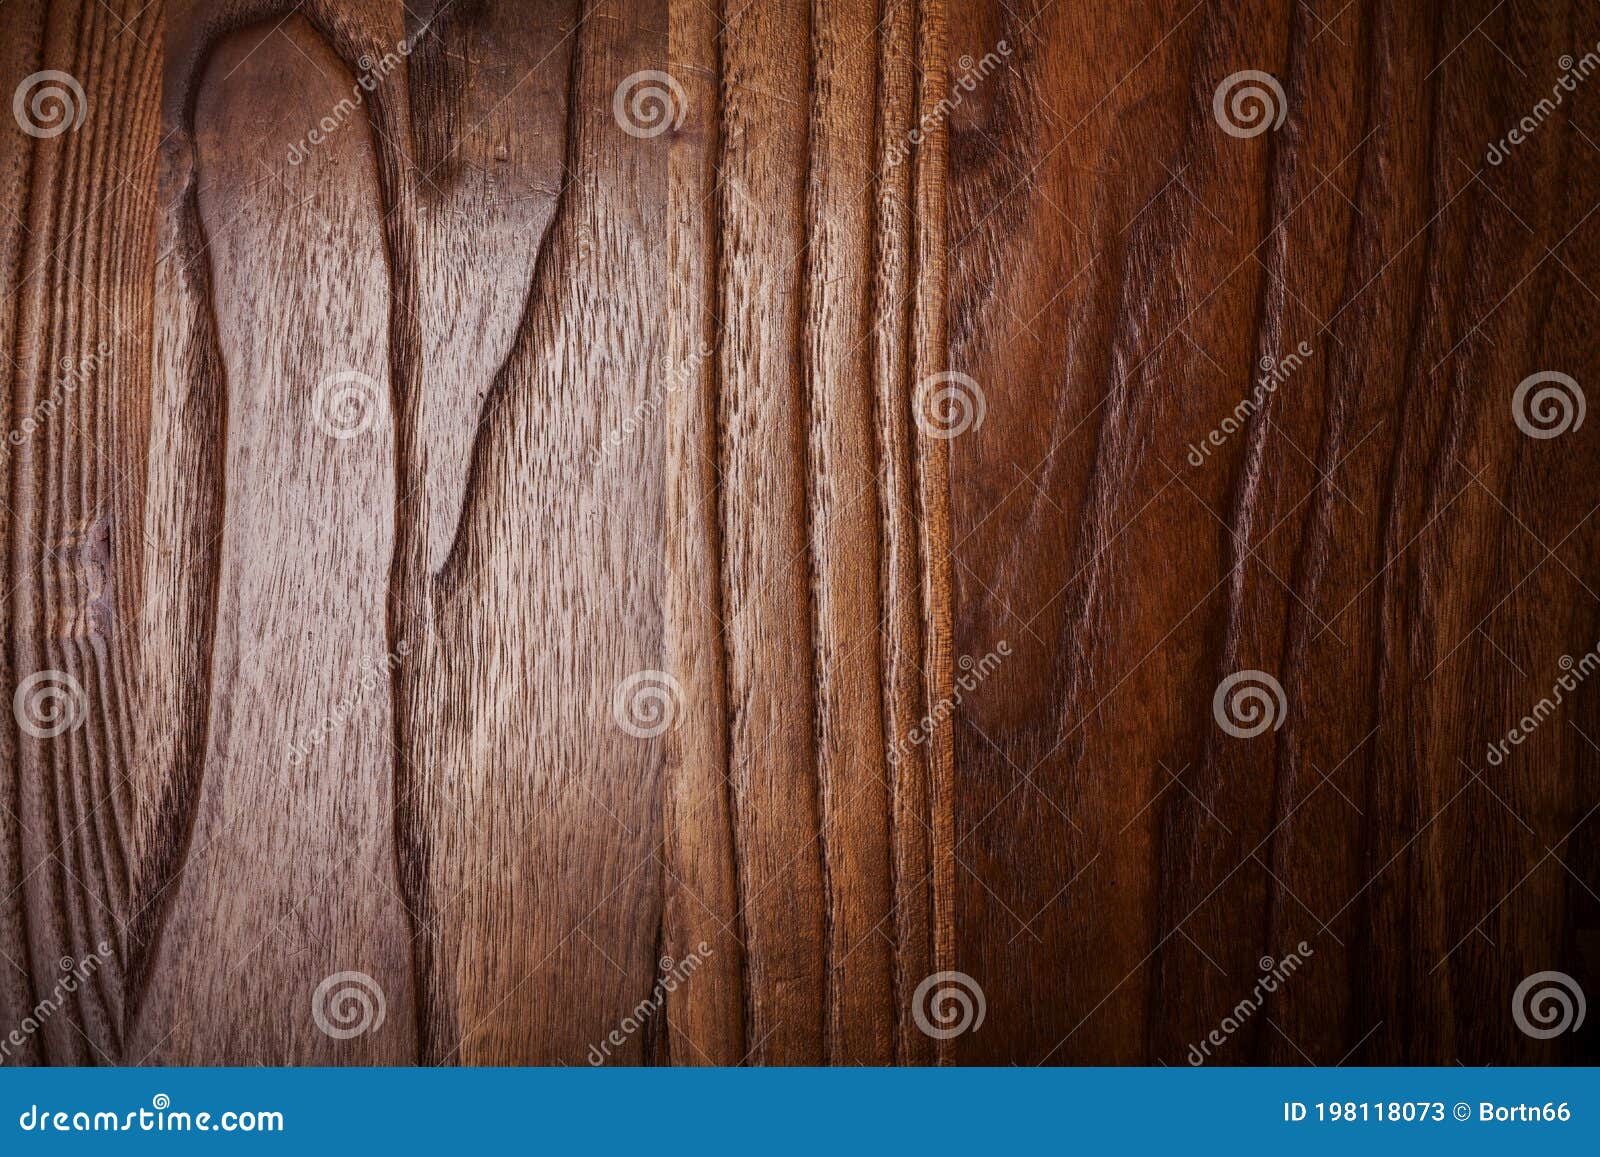 lacquered wood background.